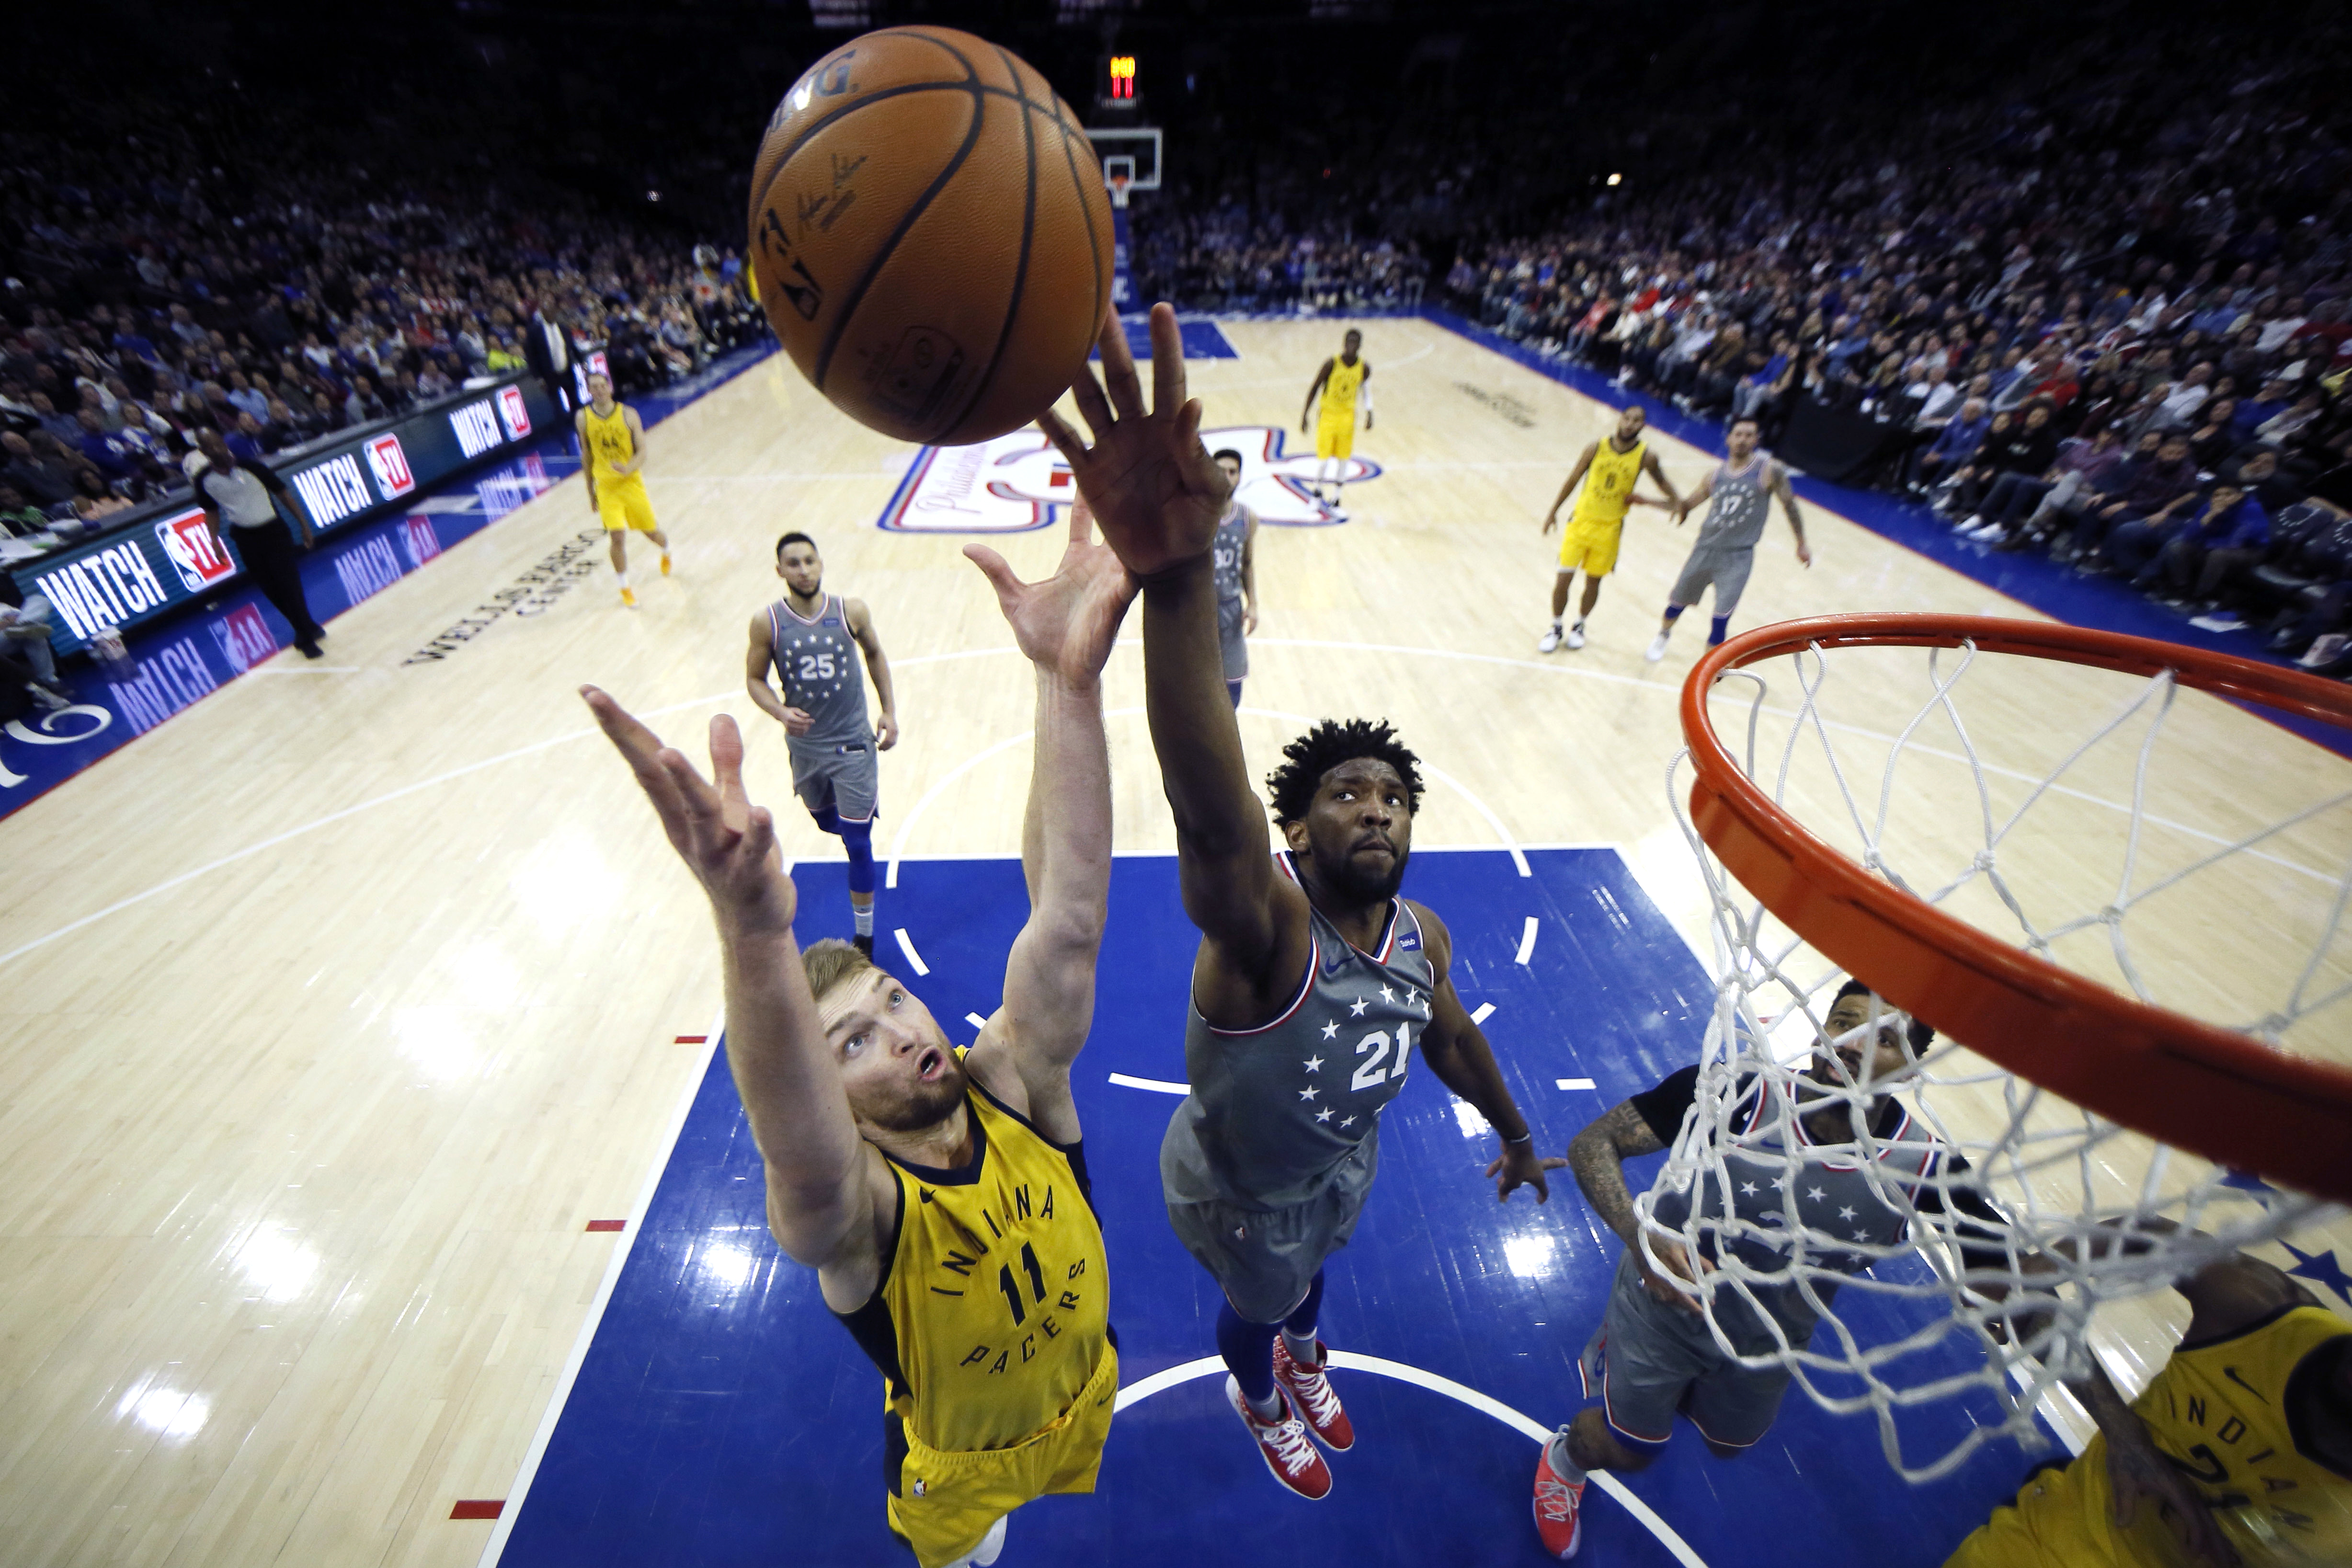 Pacers spoil Embiid’s 40-point night, beat Sixers 113-101